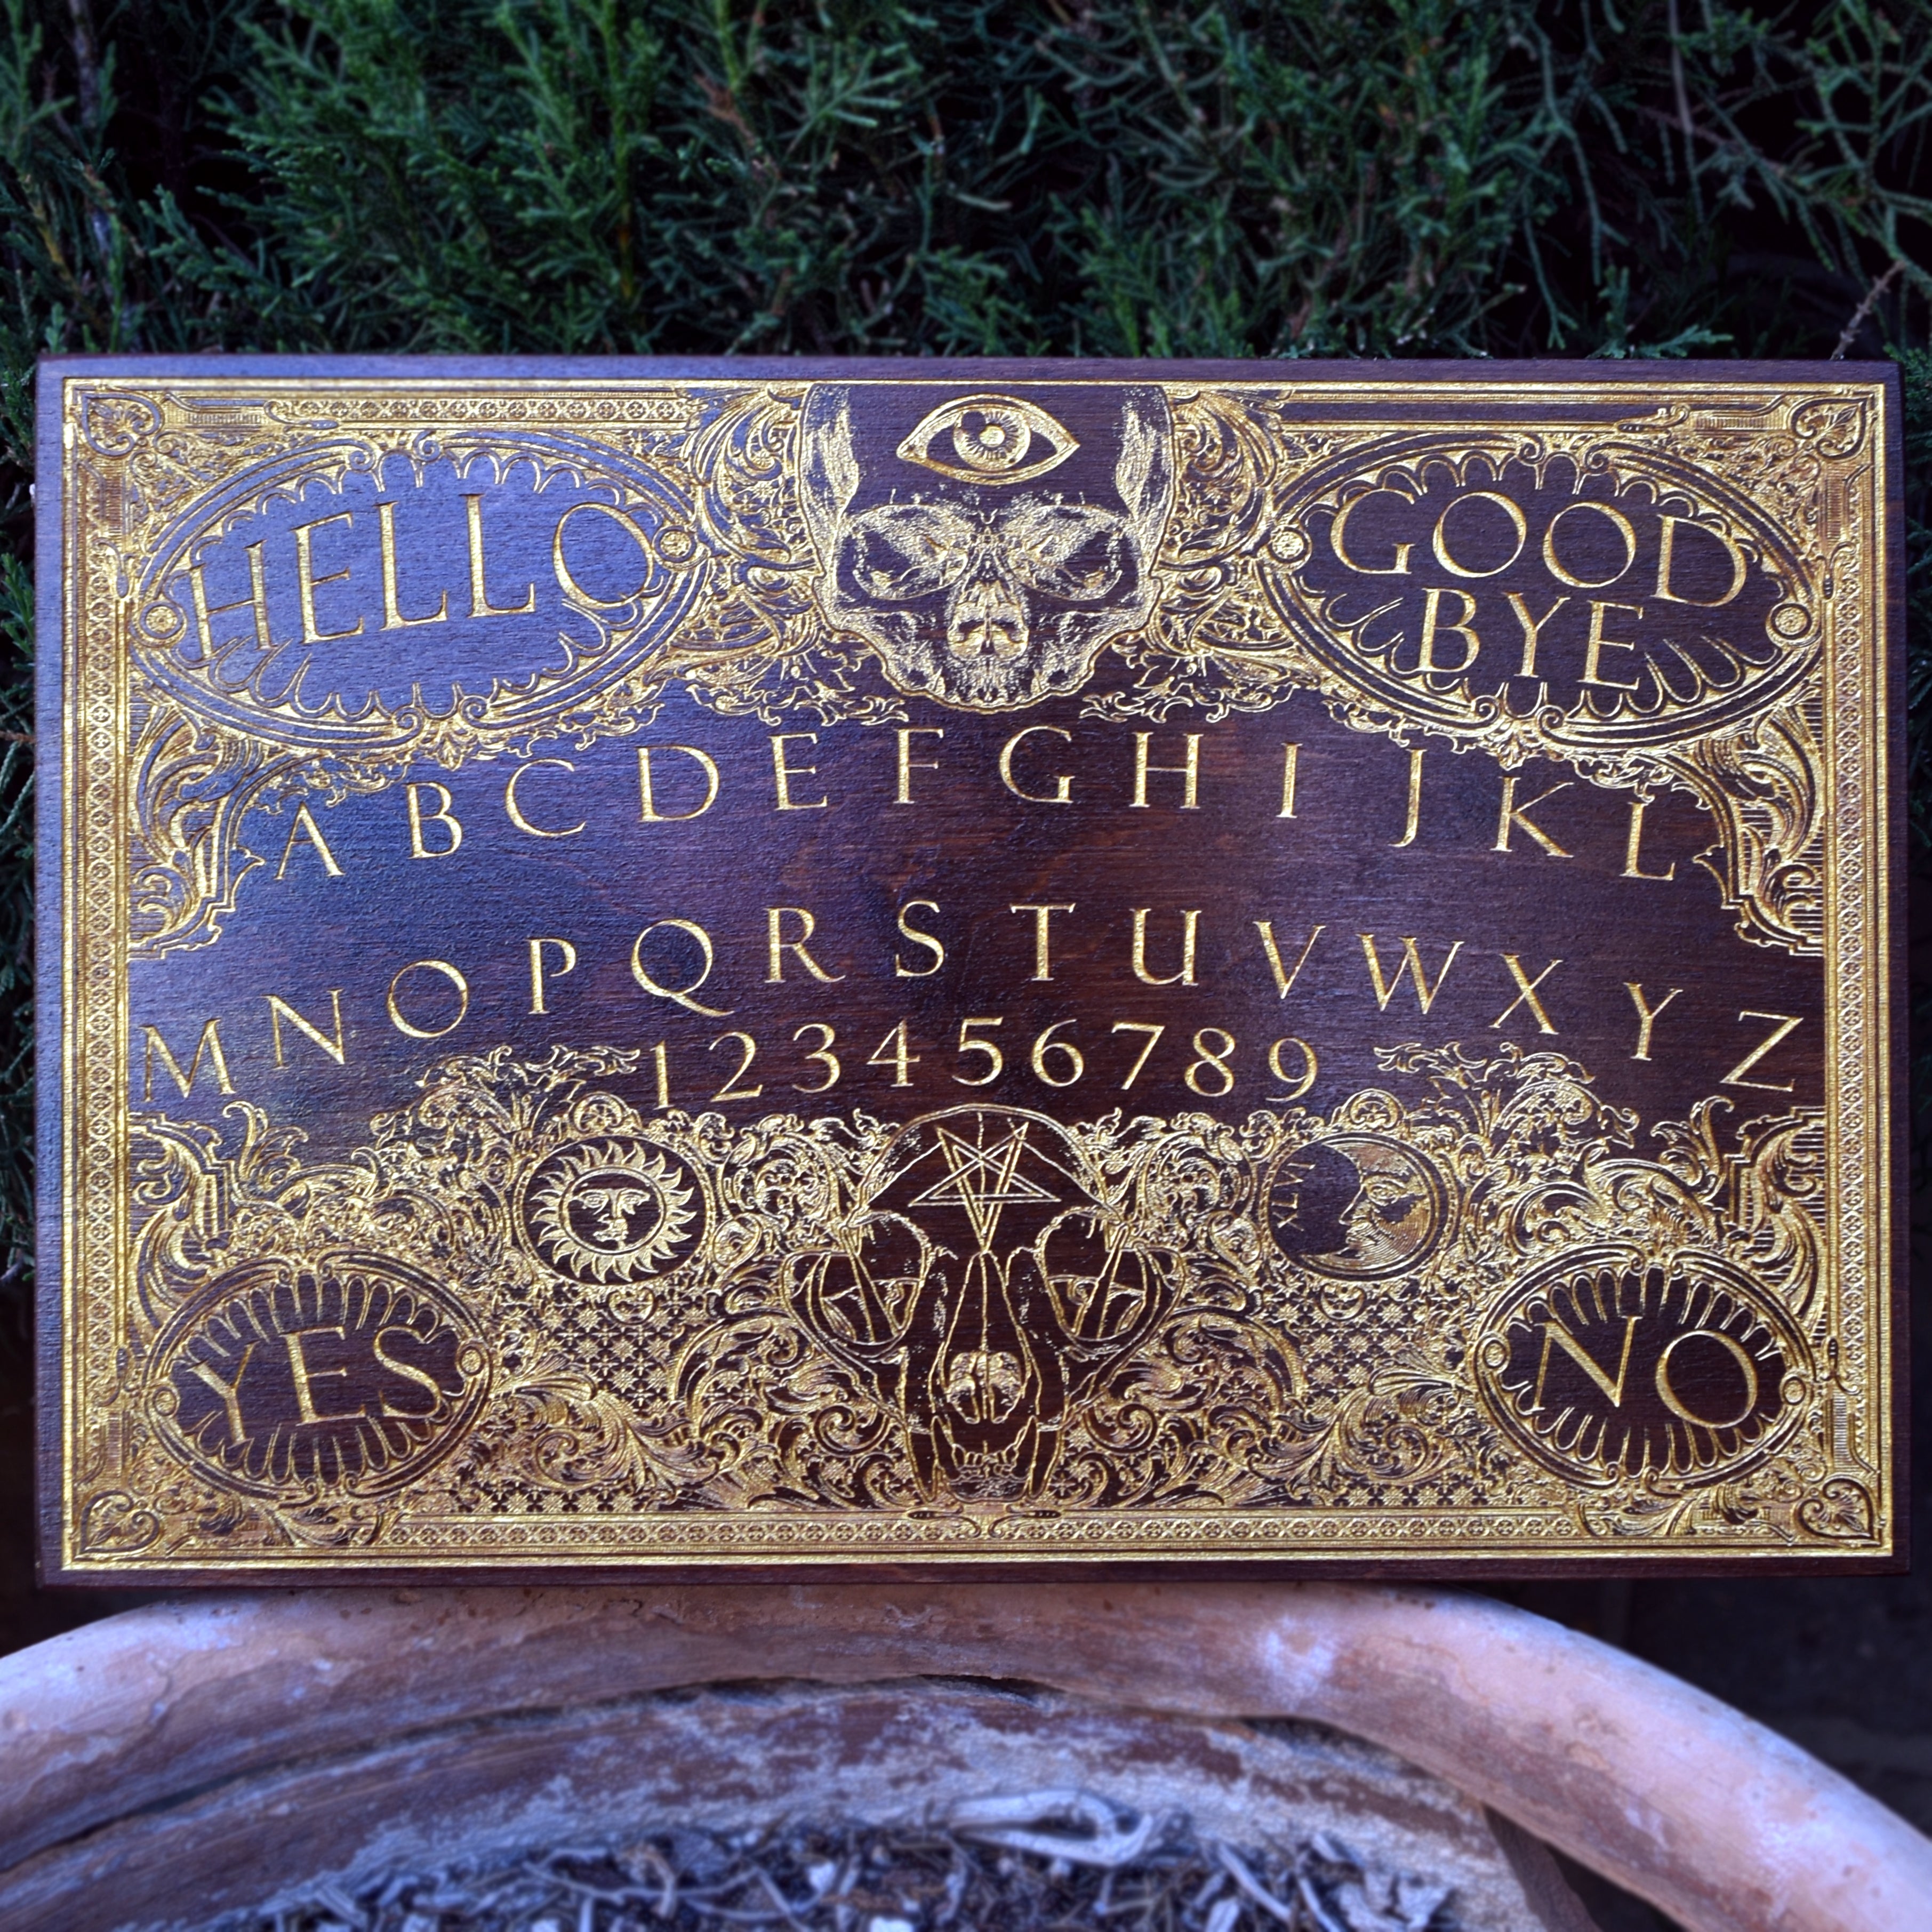 Ouija Tablet  stained and gold filled - Medium